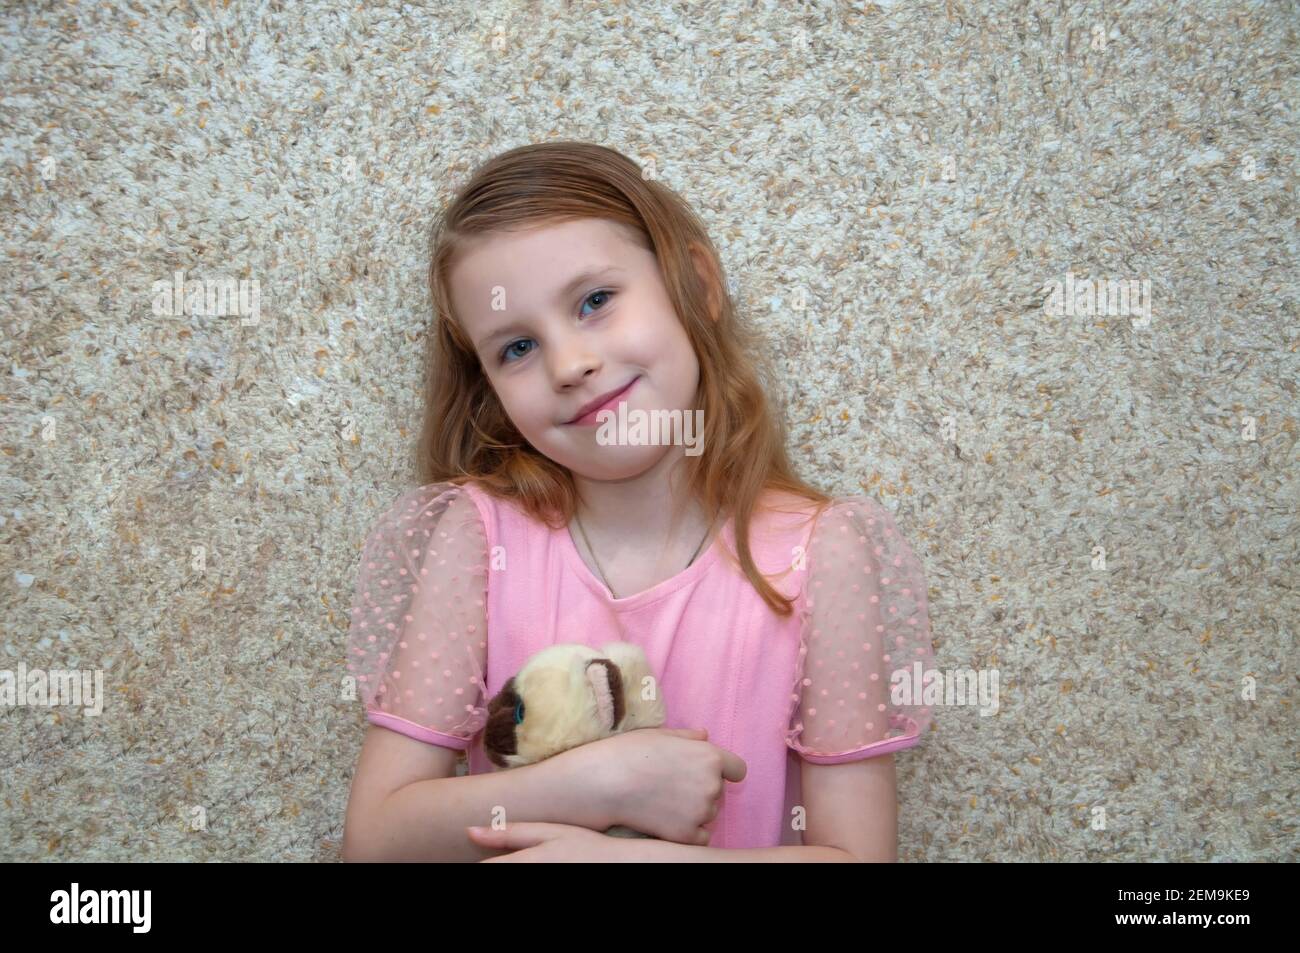 Girl with a soft toy rejoices and laughs. Stock Photo